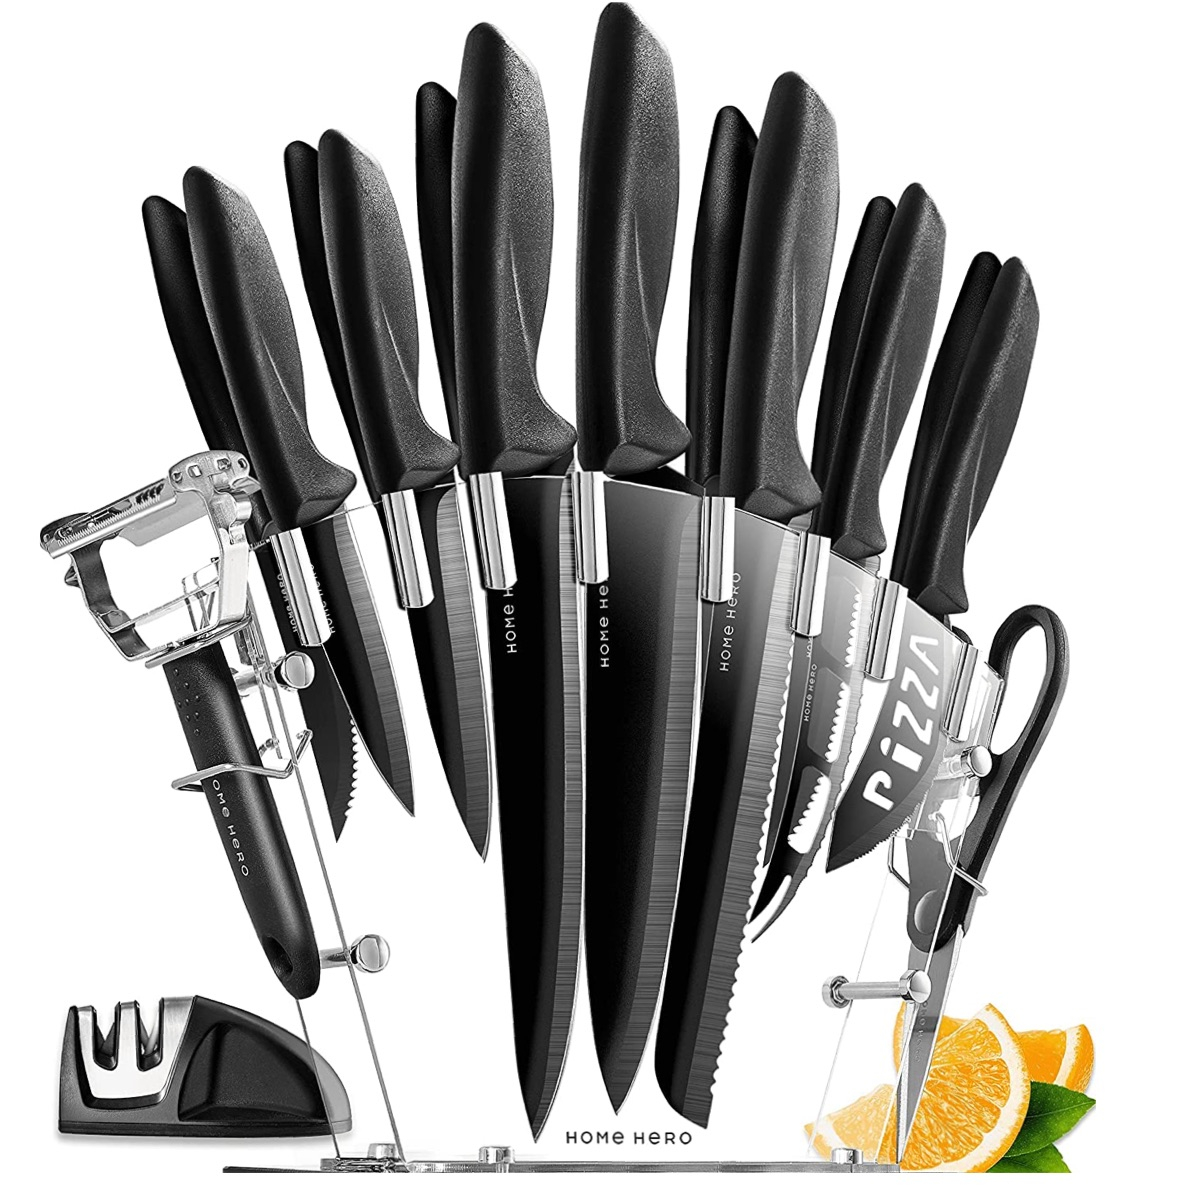 This 17-Piece Knife Set With 44,000+ 5-Star Reviews Is on Sale for $35